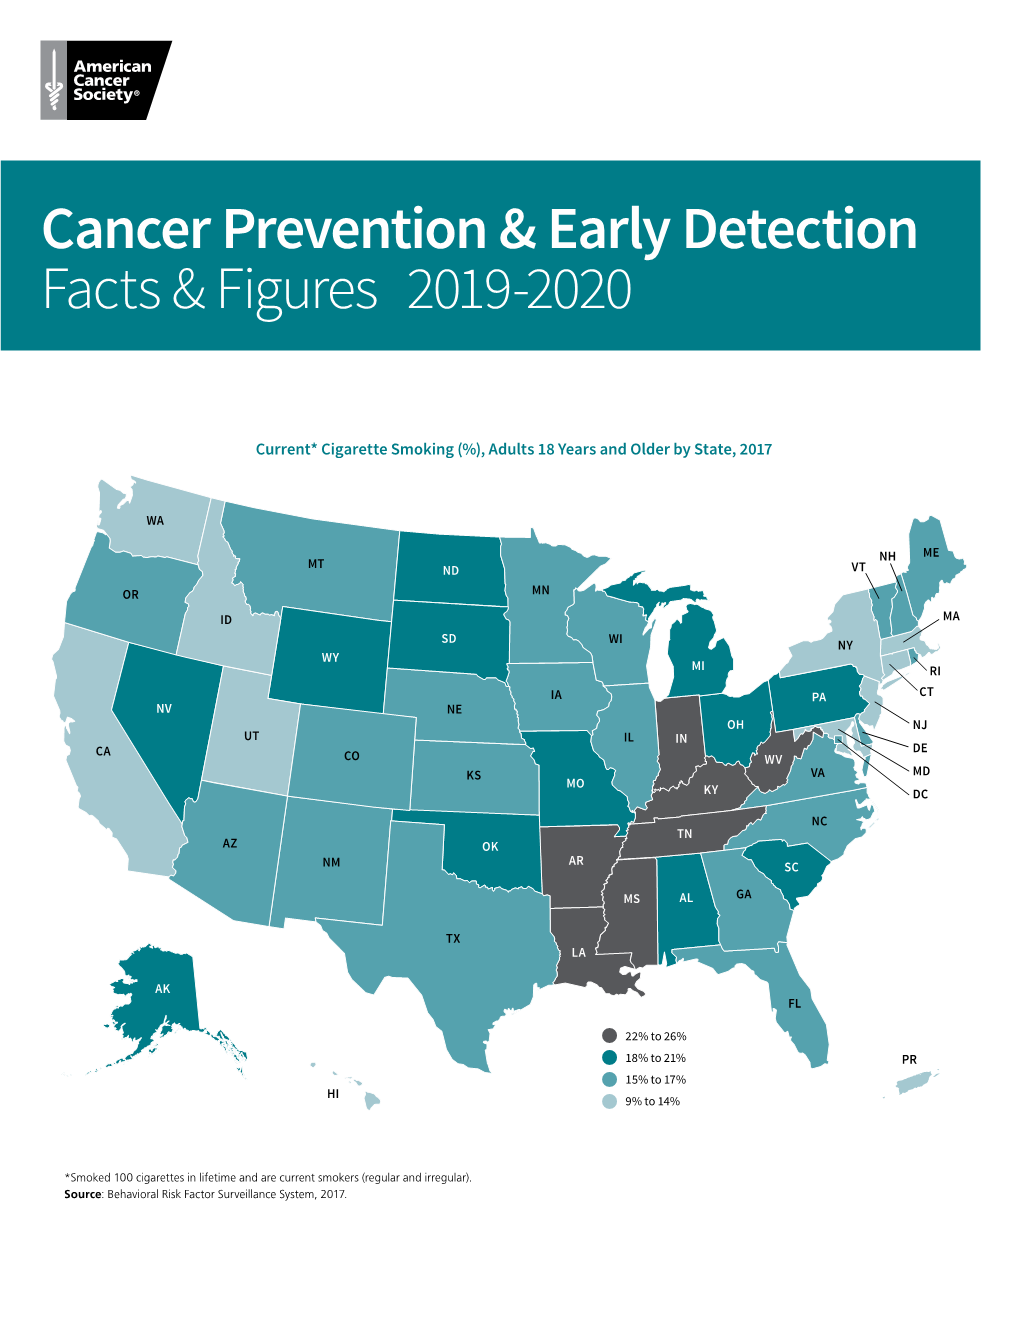 Prevention & Early Detection Facts & Figures 2019-2020